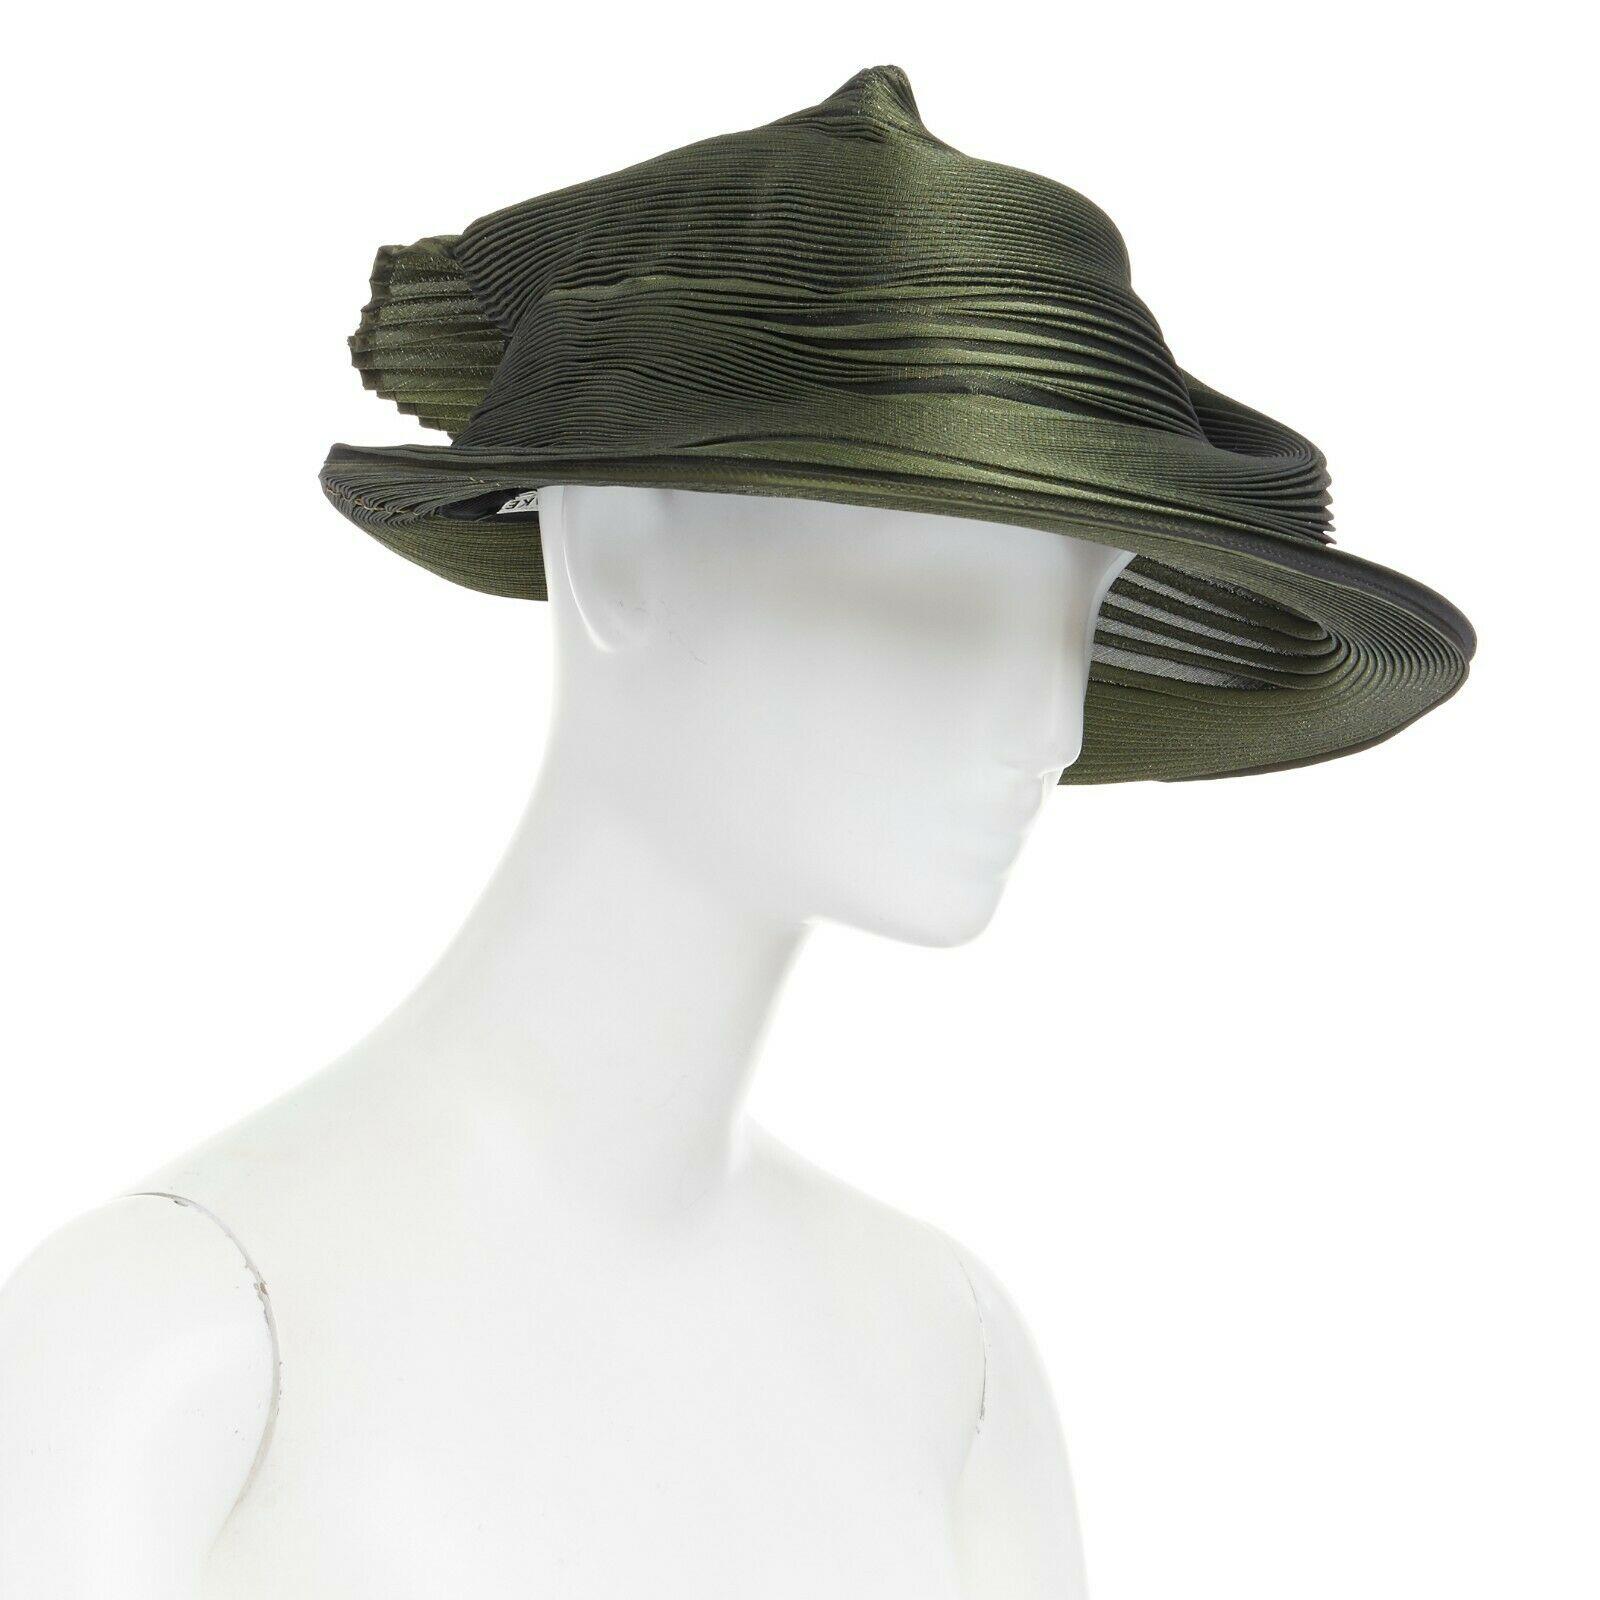 ISSEY MIYAKE
Green pleated structural hat • Orbital brimmed design • Pleats are slightly moldable to different shapes • Can wear back to front for different effect • Made in Japan

CONDITION
Excellent, no flaws to note.

SIZING
One size fits